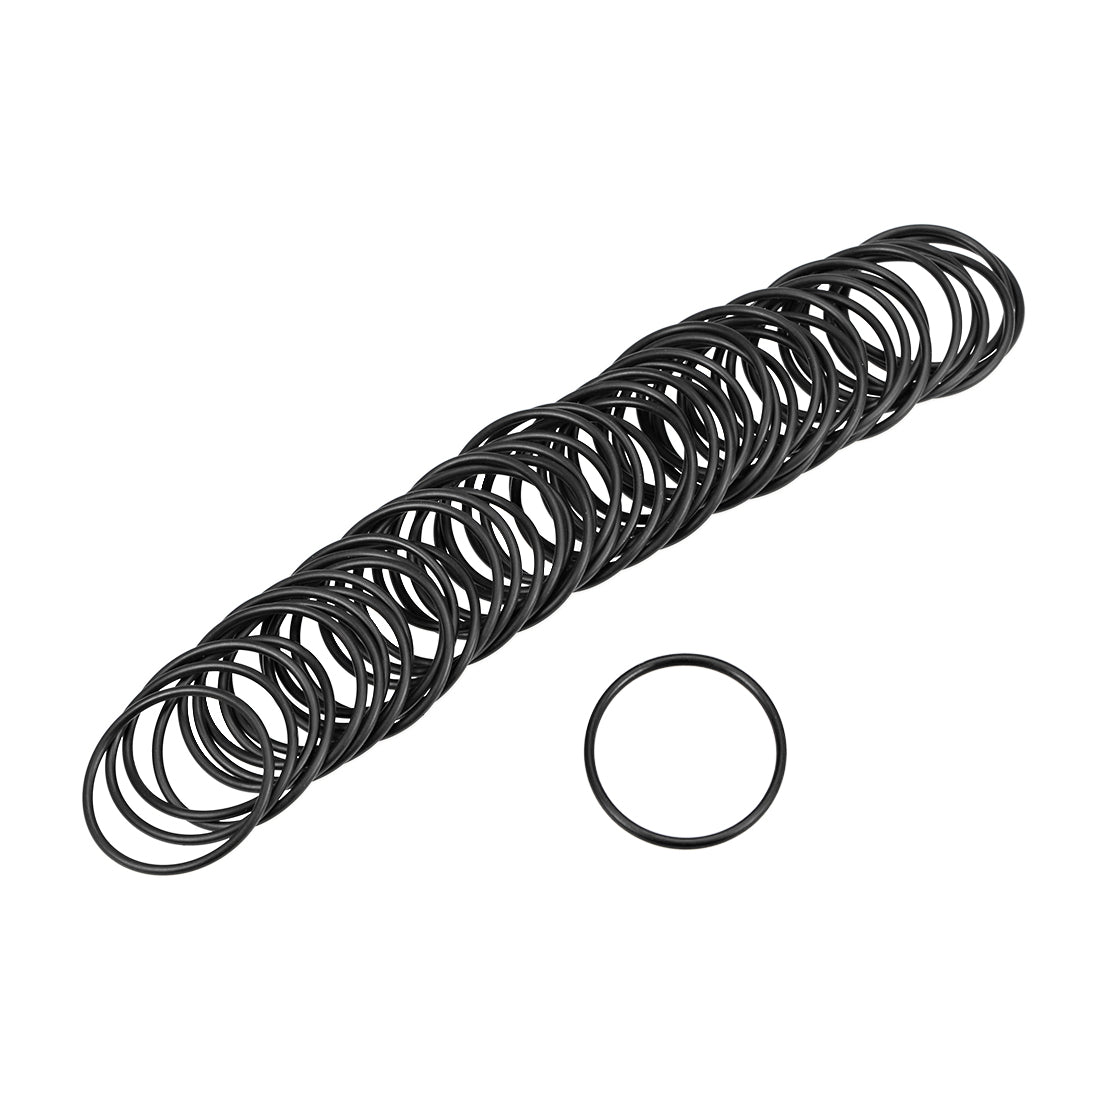 uxcell Uxcell O-Rings Nitrile Rubber 23mm Inner Diameter 26mm OD 1.5mm Width Round Seal Gasket 50 Pcs